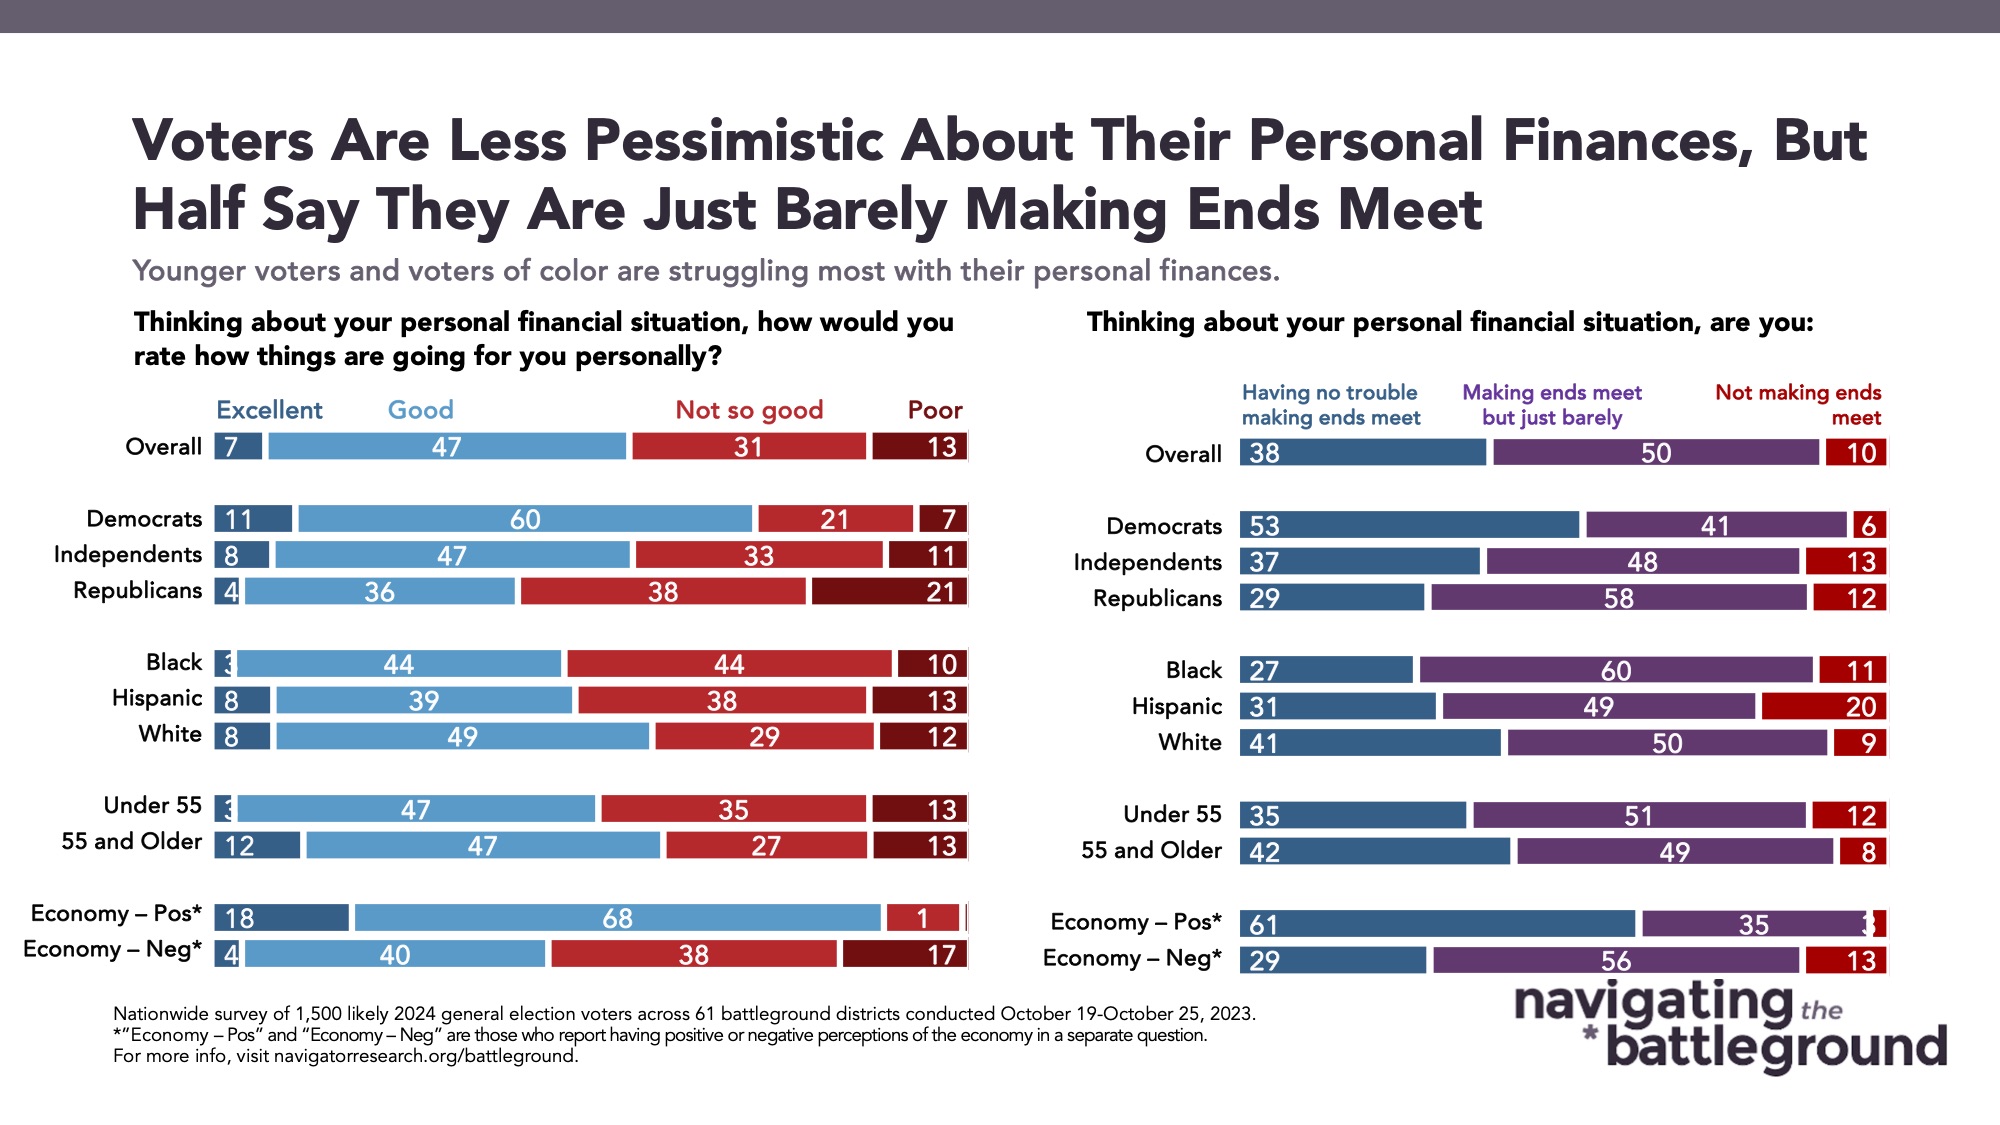 Bar graph of polling data from Navigating the Battleground. Title: Voters Are Less Pessimistic About Their Personal Finances, But Half Say They Are Just Barely Making Ends Meet